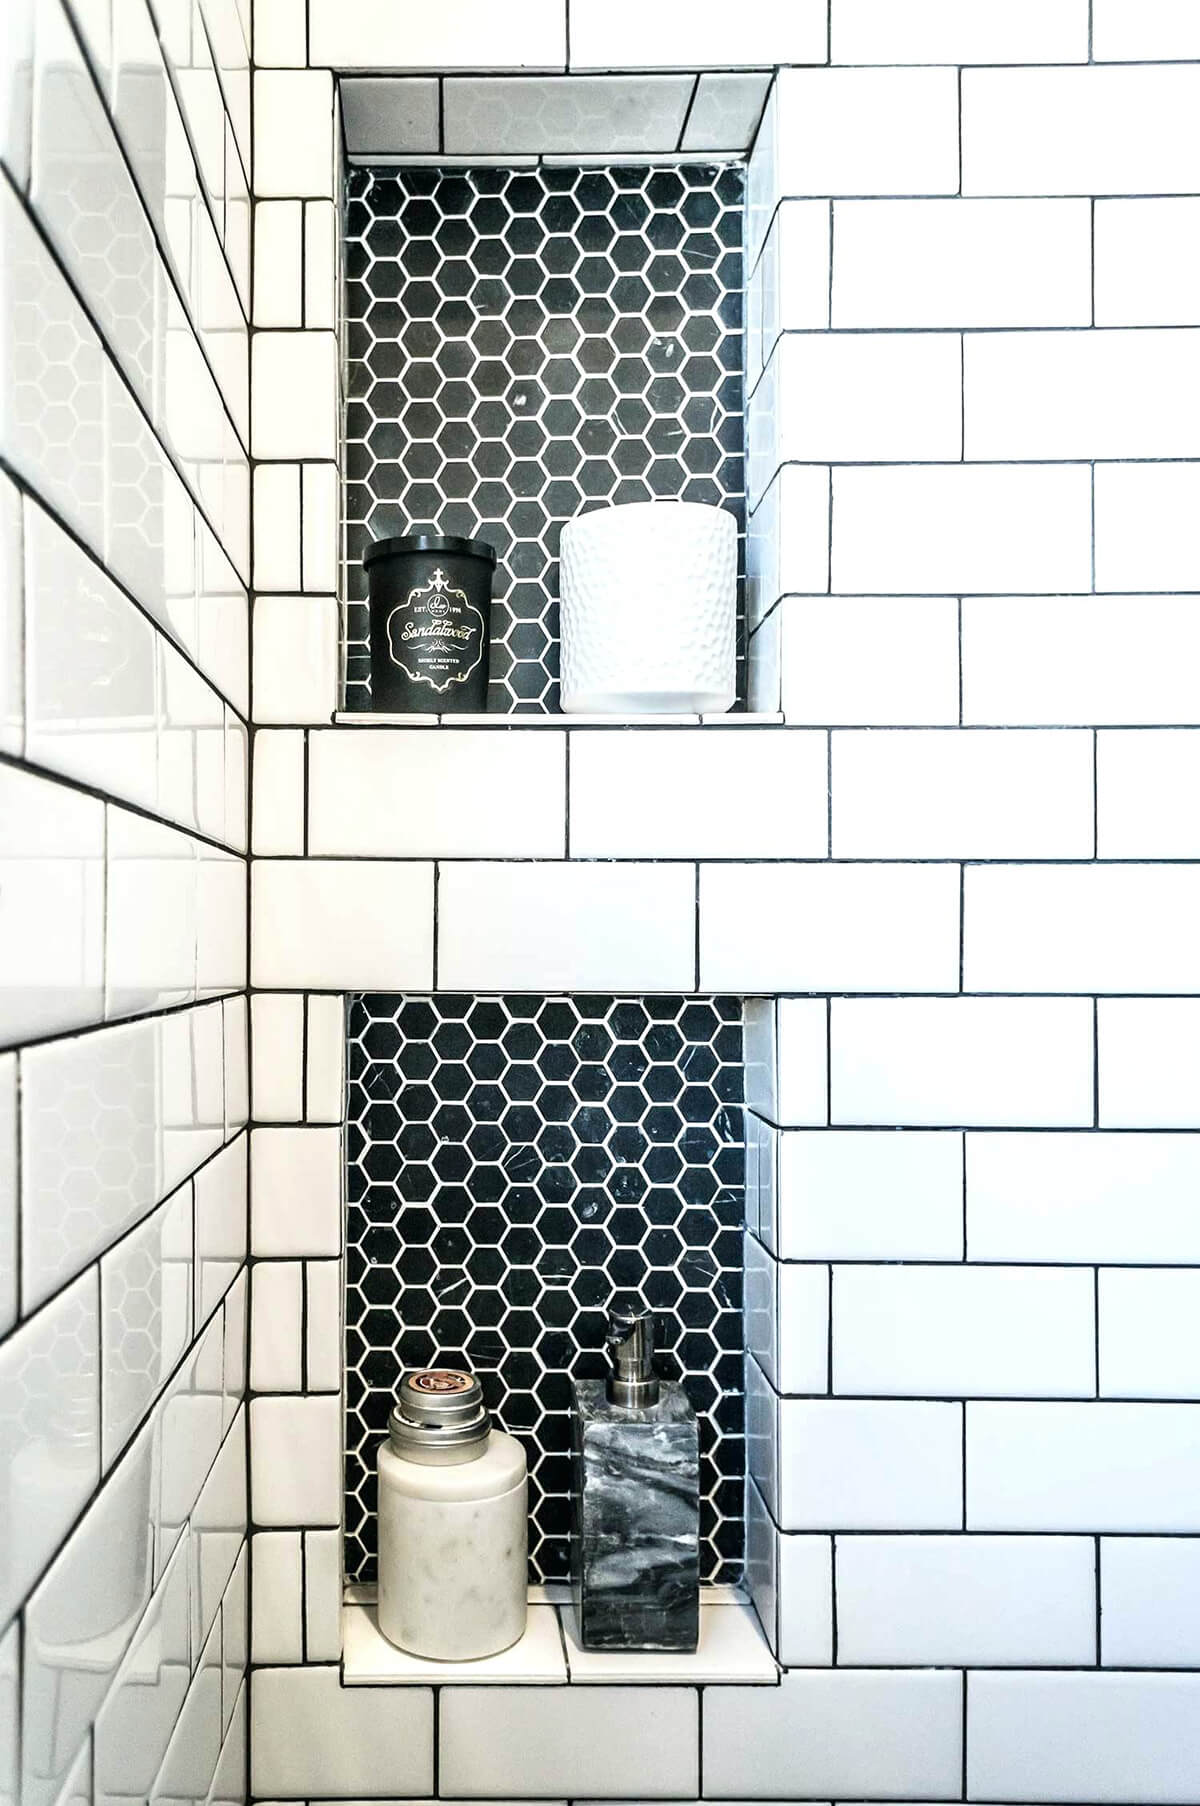 Built-in Tiled Shelves with Honeycomb Accent